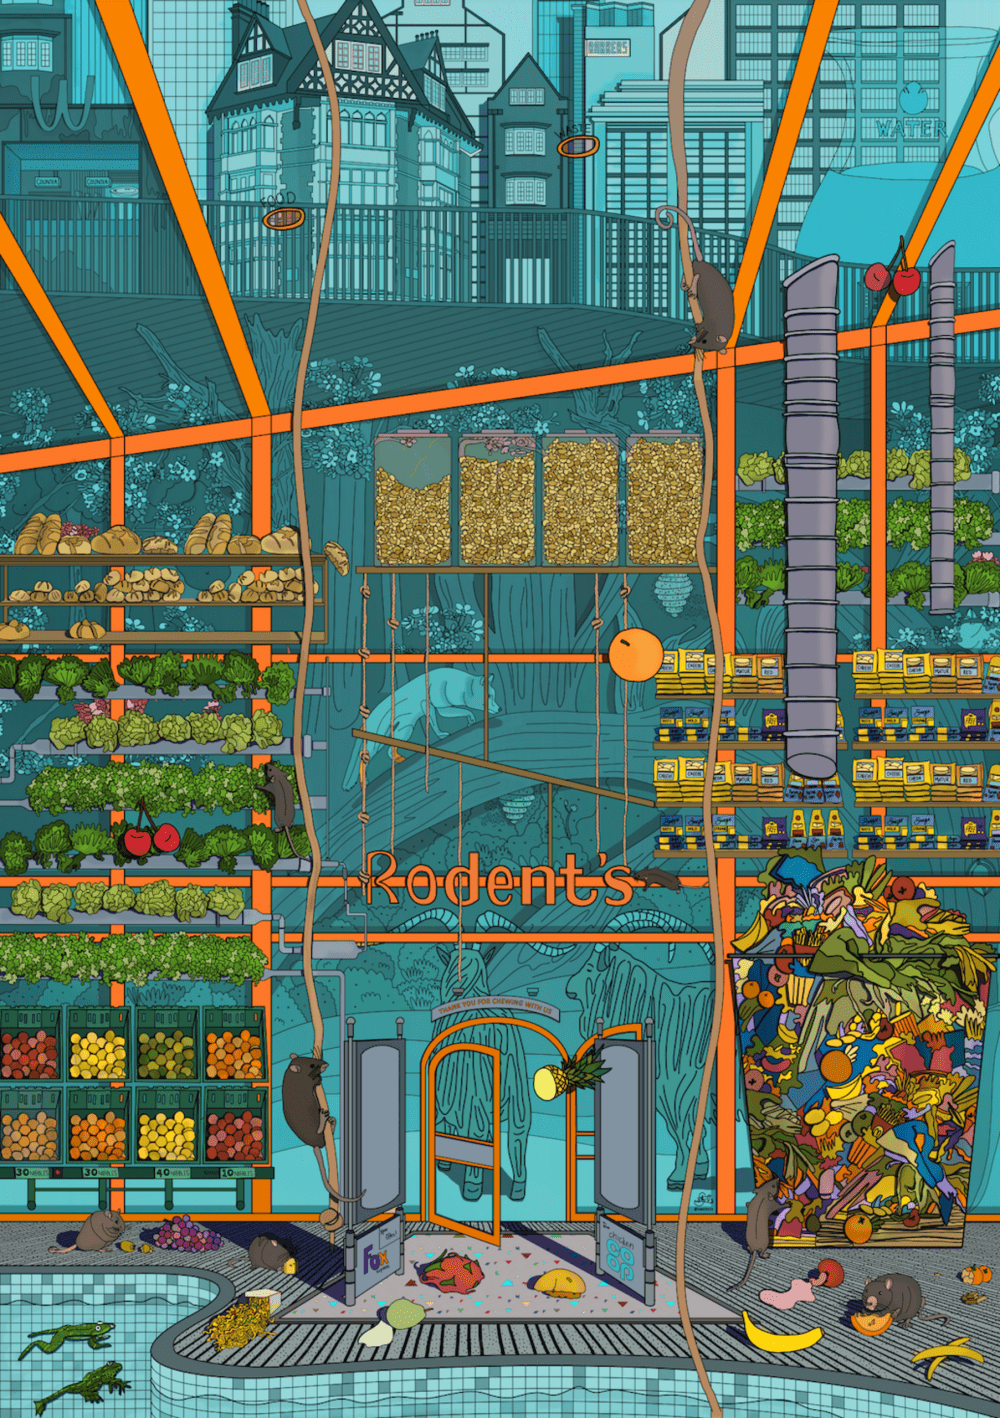 Colourful illustration of what looks like a grocery shop, with a sign above the doorway reading ‘Rodent’s’, with two rat or mouse figures climbing rope-like structures that hang in the space.